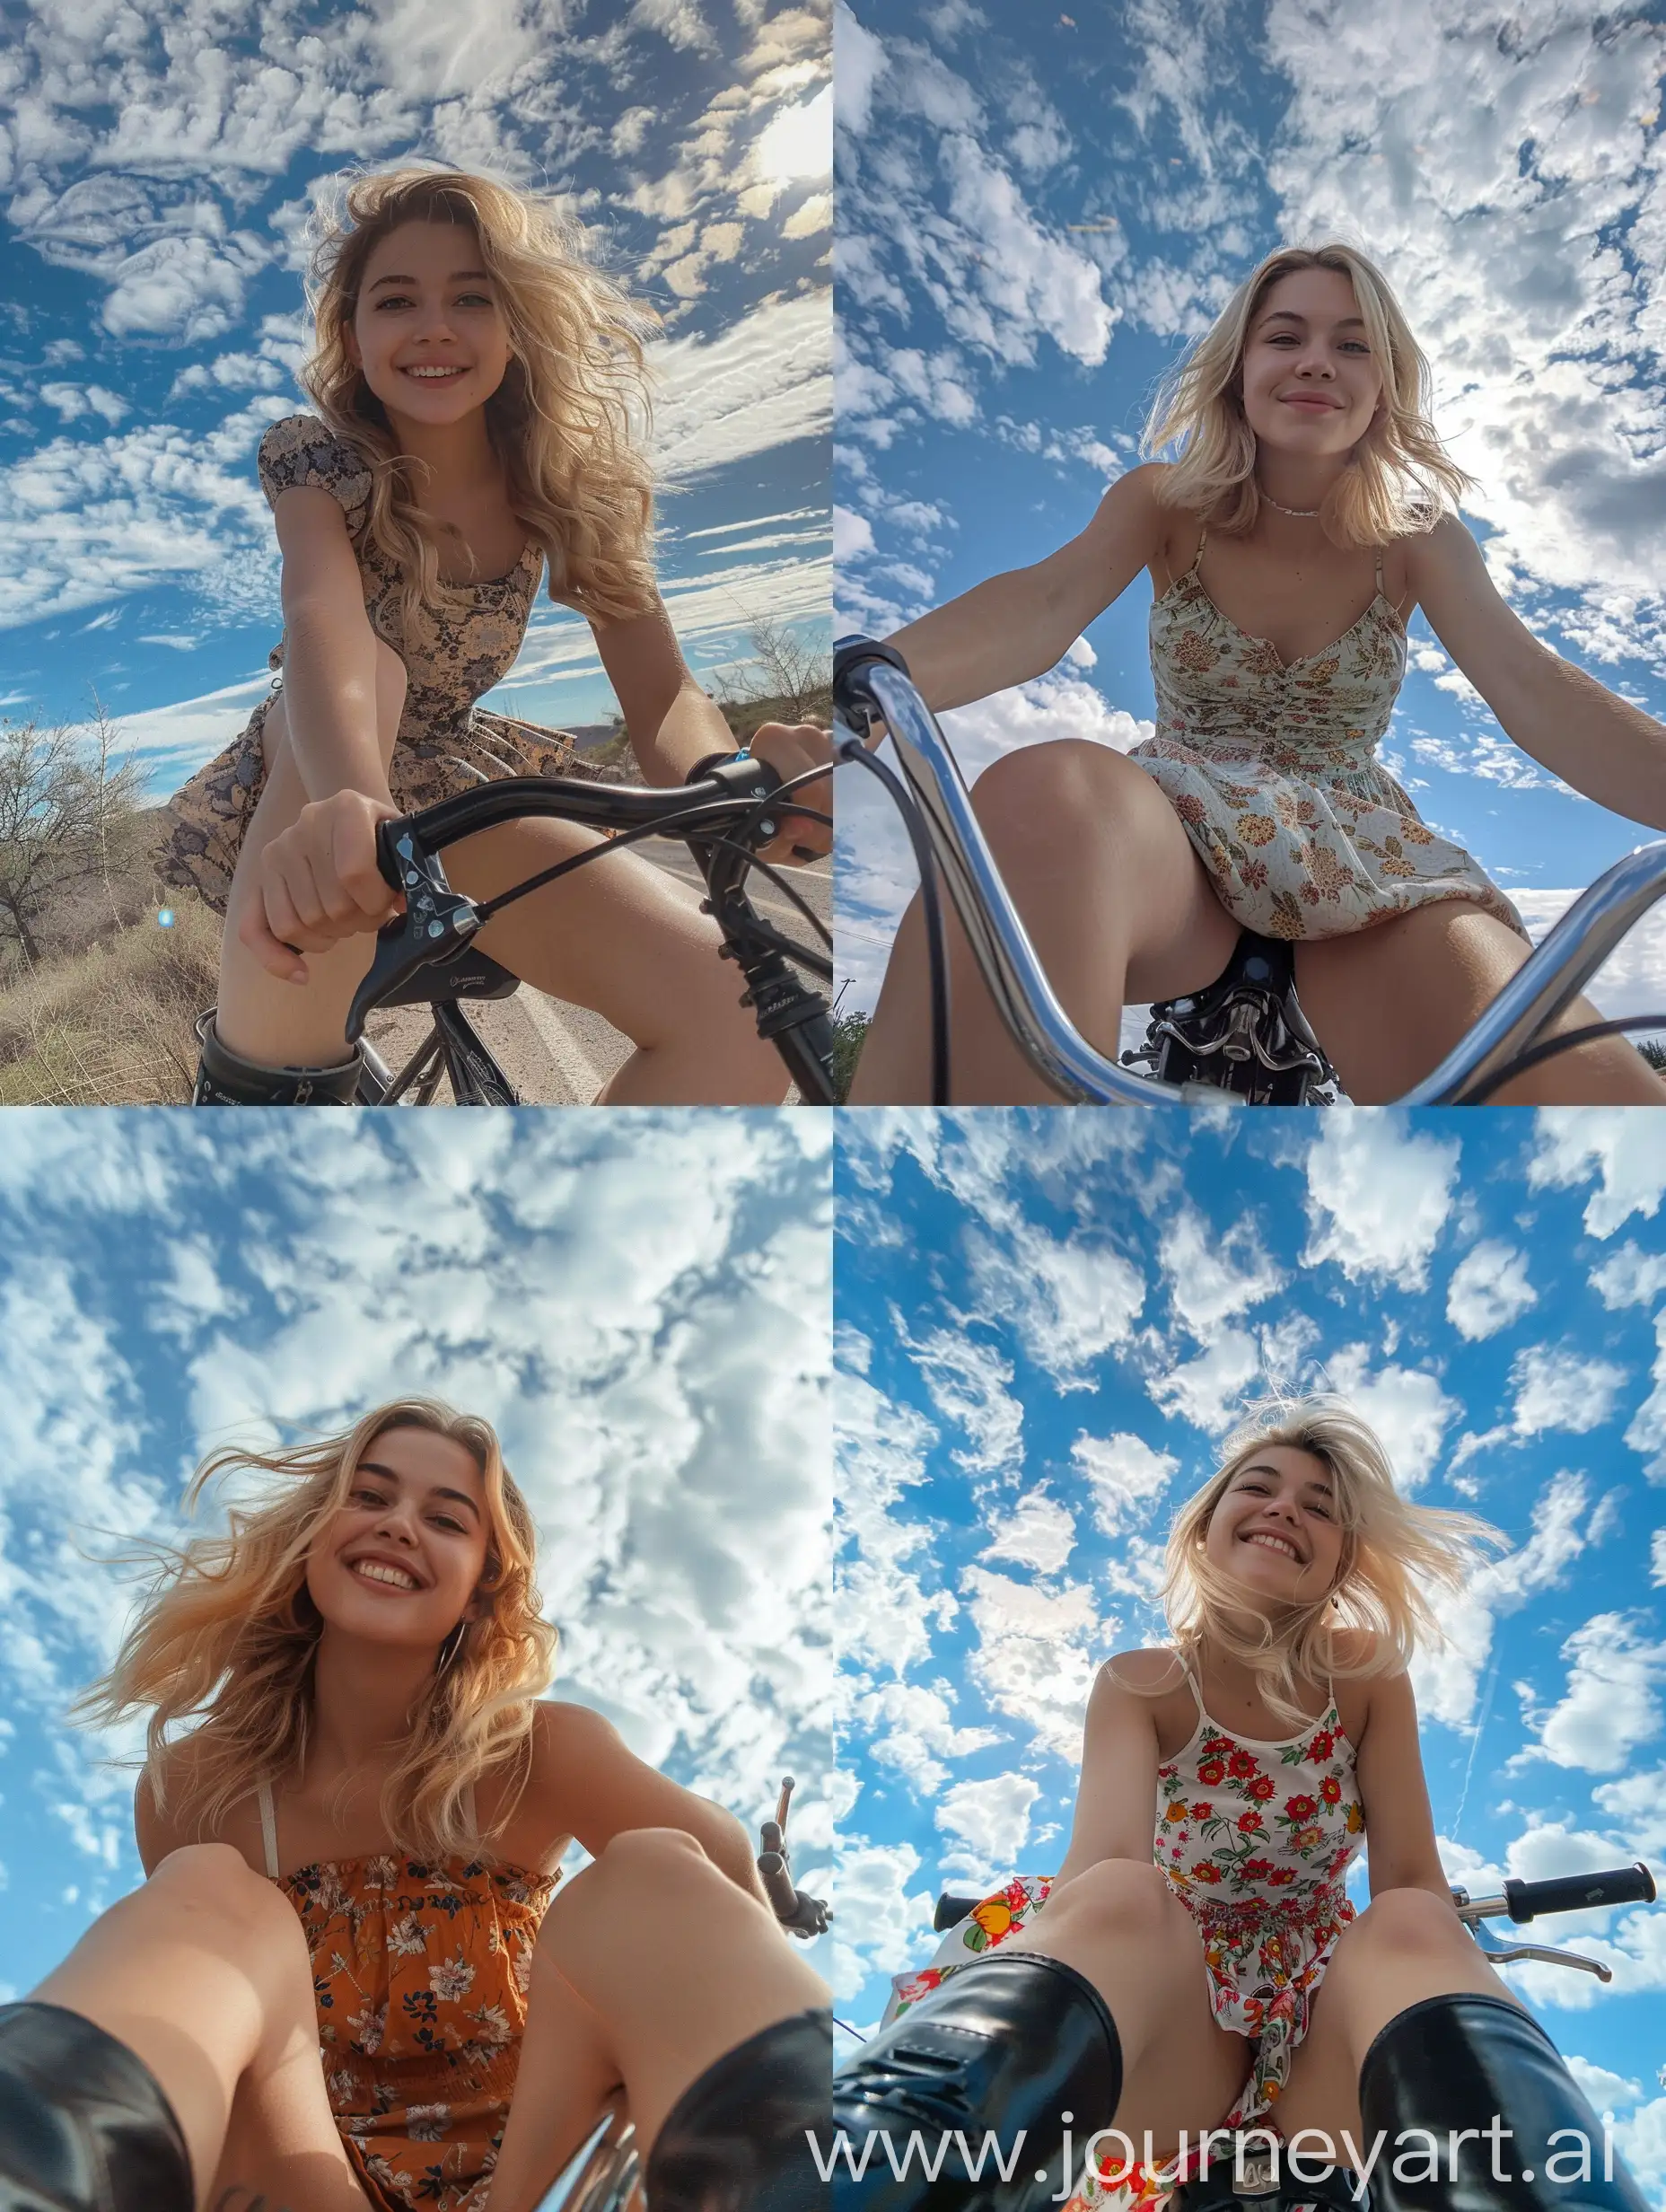 a girl, 22 years old, blonde hair, small dress, black boots, smiling, , sitting on a bicycle, no effects, selfie , iphone selfie, no filters, natural , iphone photo natural, camera down angle, sky view, down view